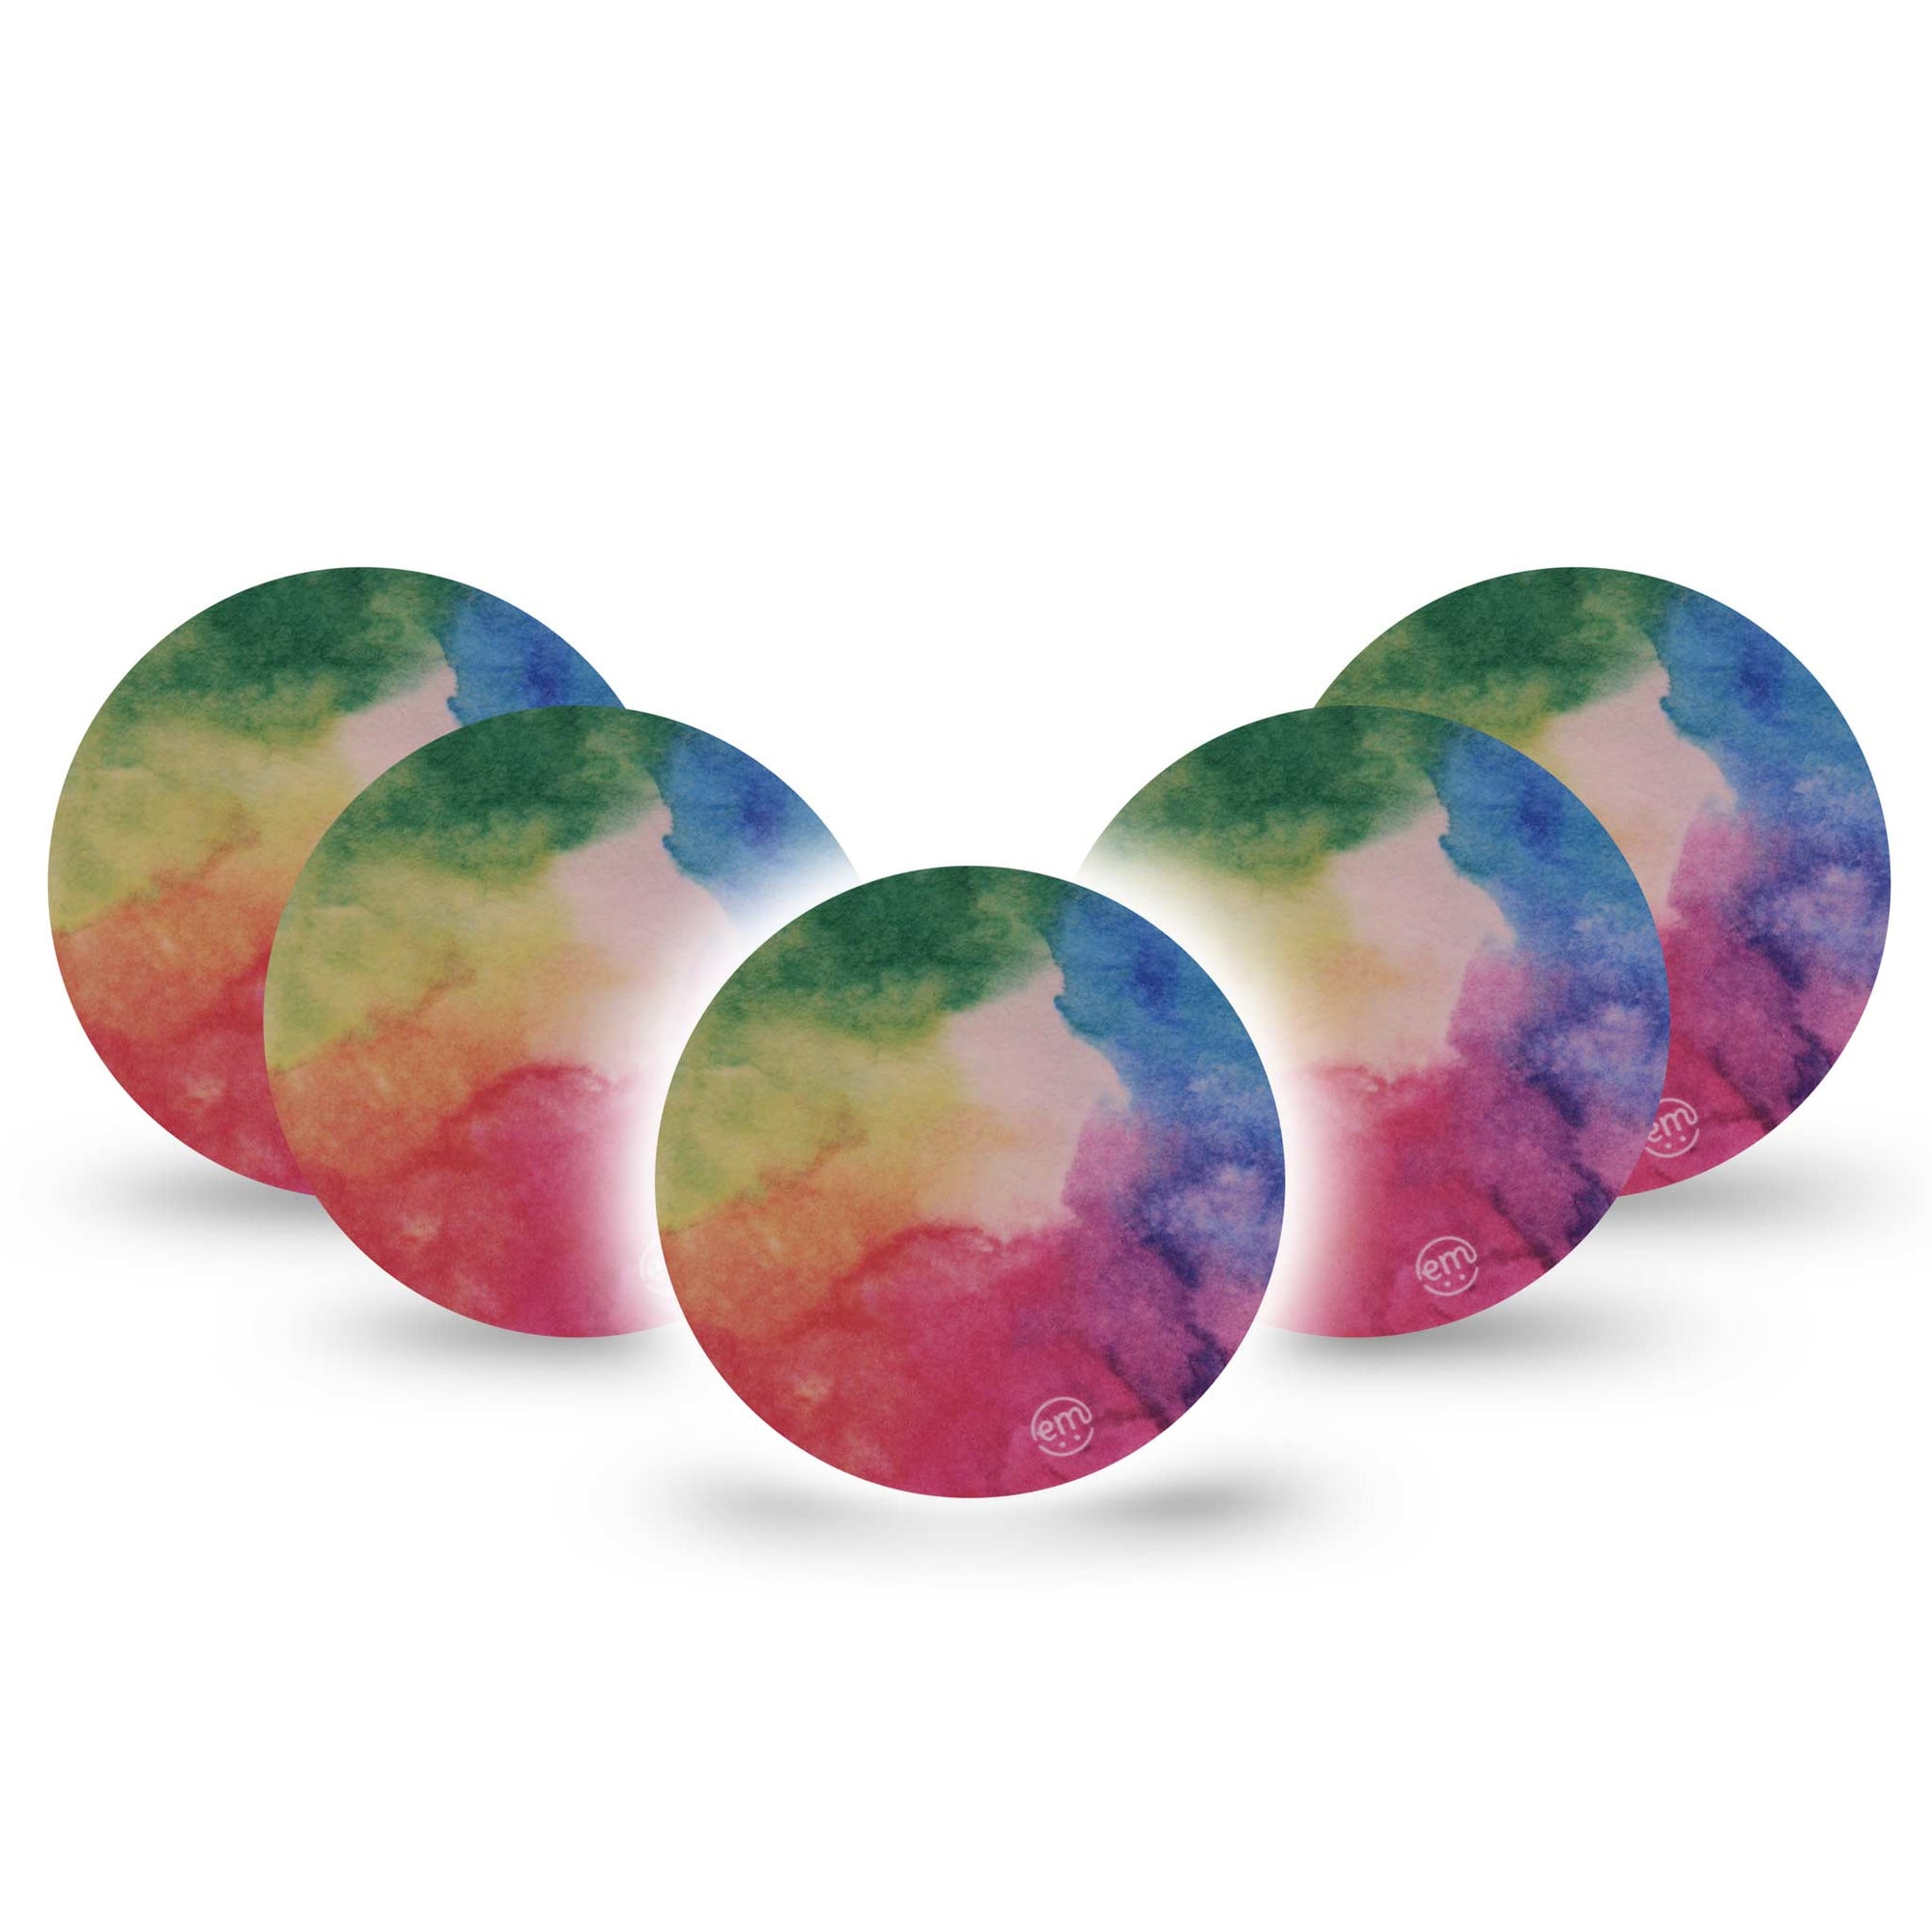 ExpressionMed Rainbow Clouds Libre Overpatch 5-Pack  Edit alt text